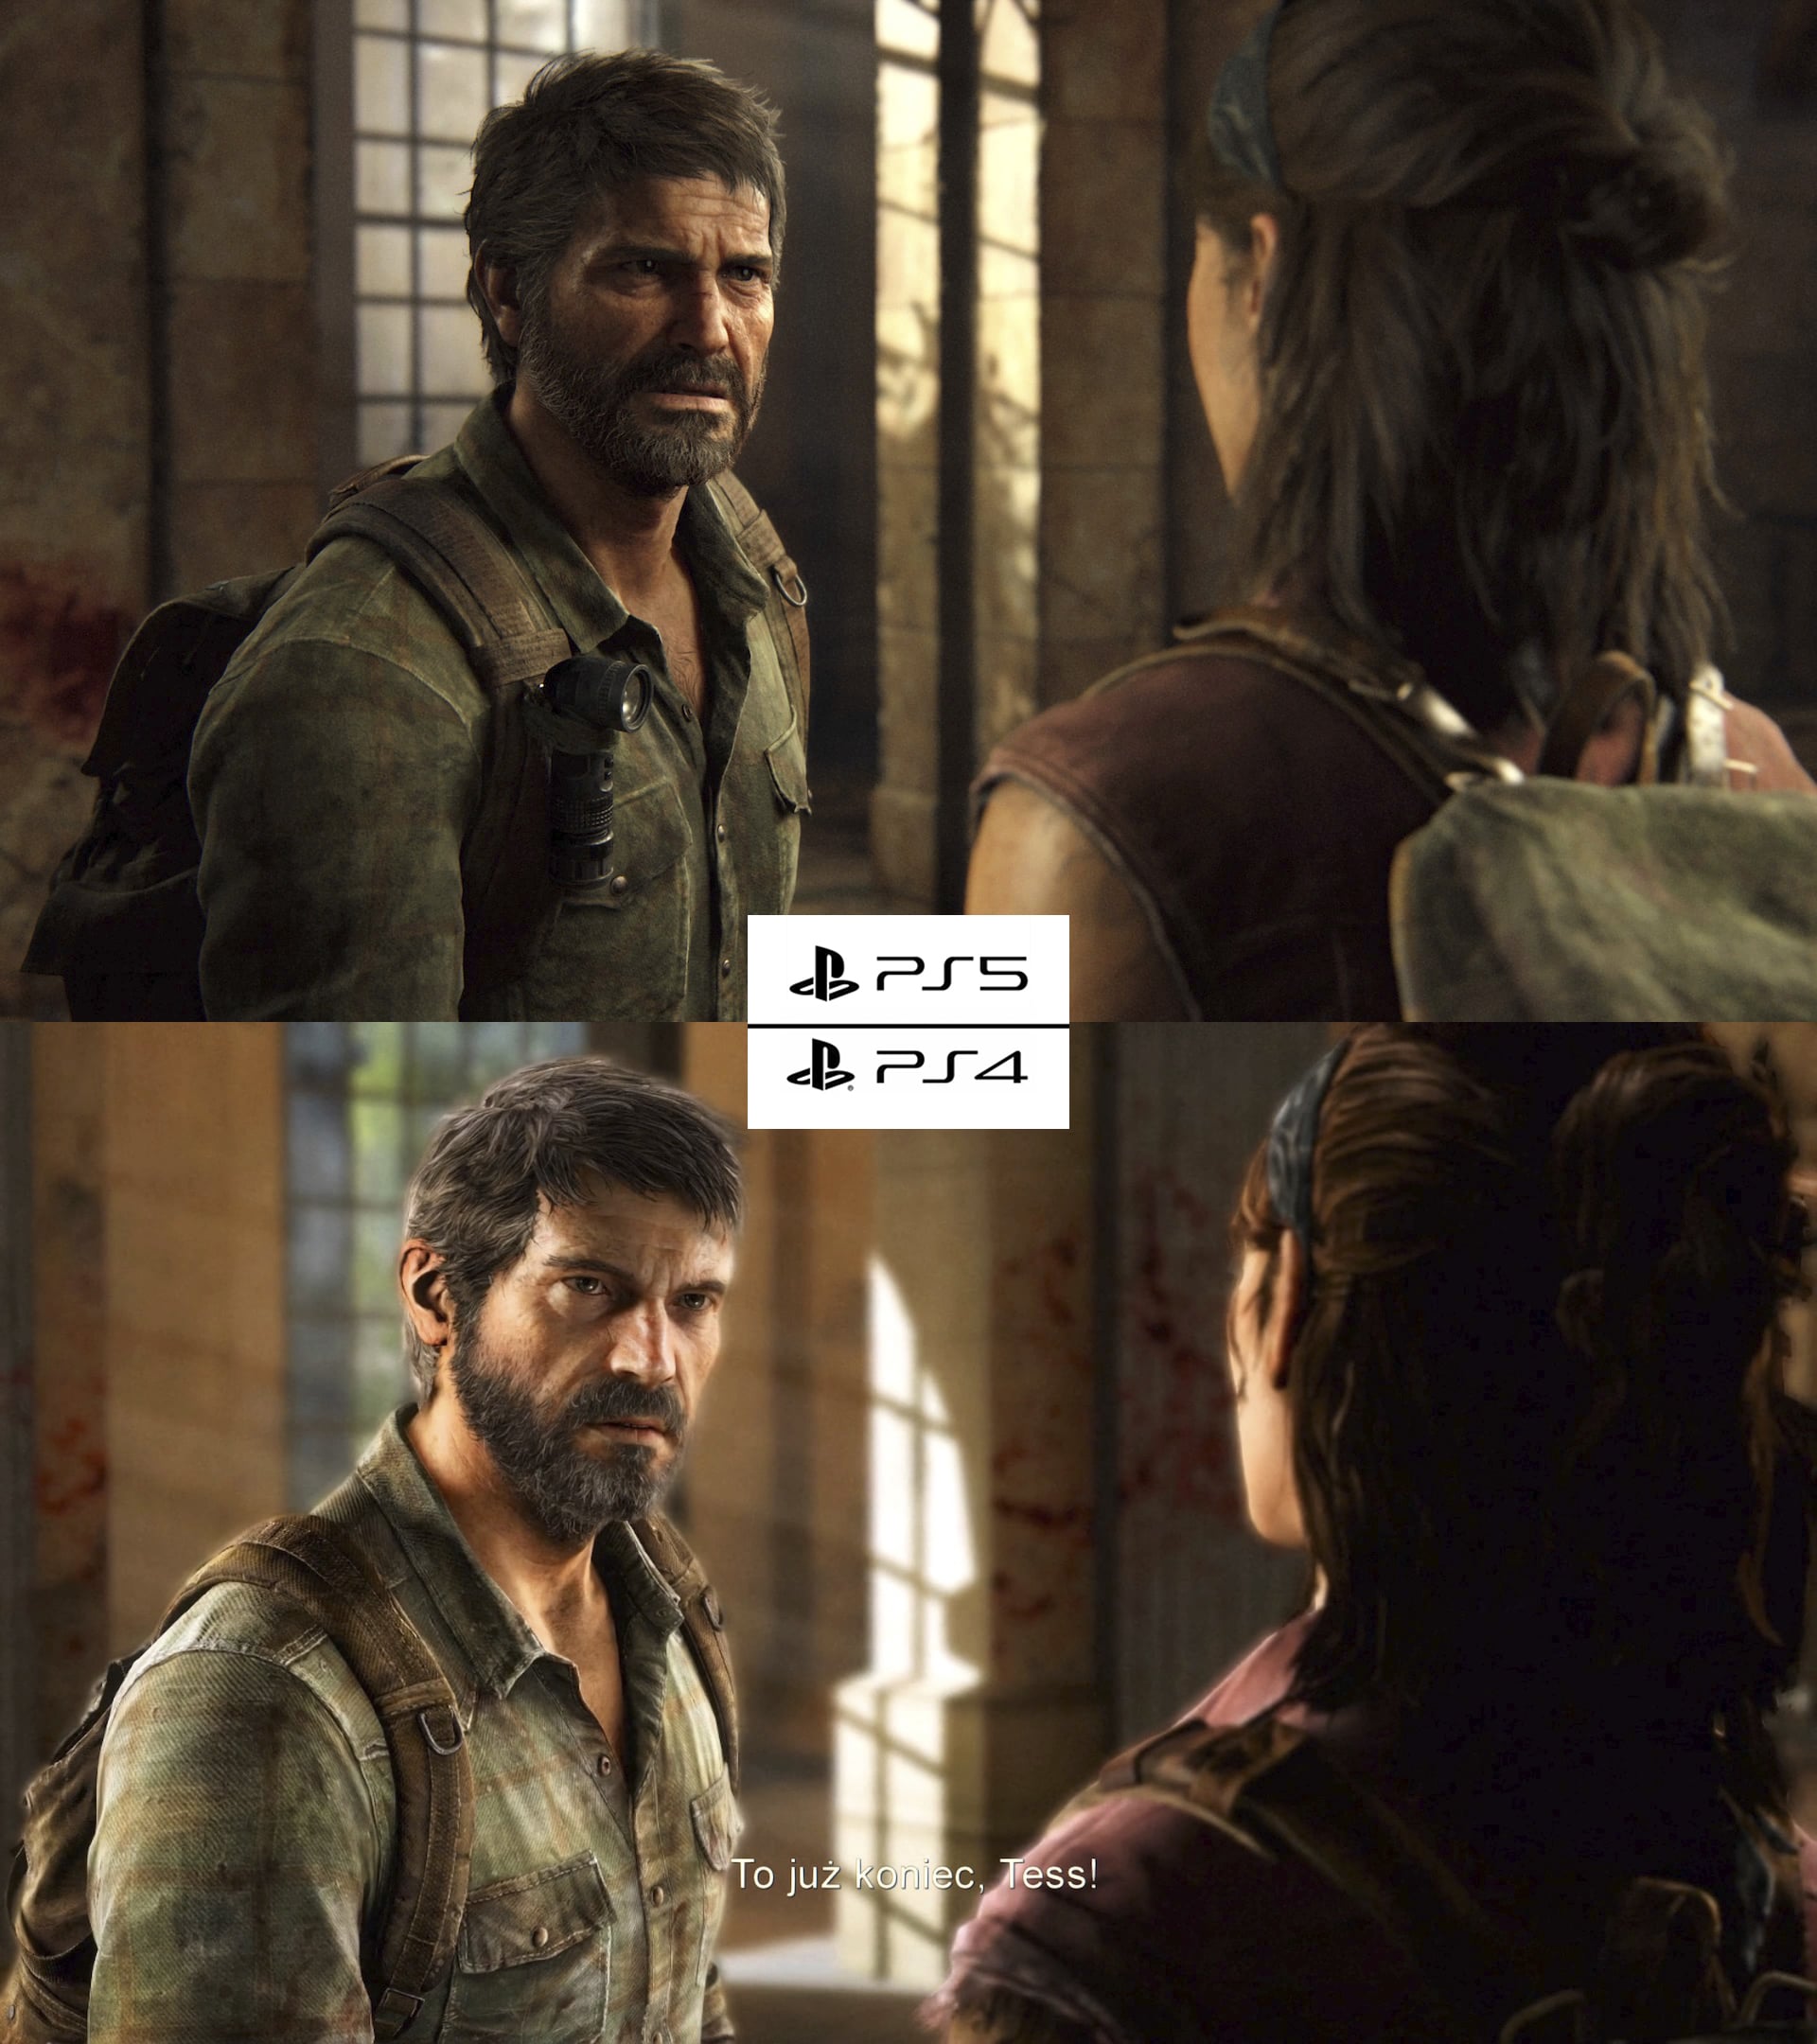 Julien  on X: Sarah - The Last of us (PS4) vs The Last of us part 1  (PS5). #THELASTOFUS #PS5 🎮  / X